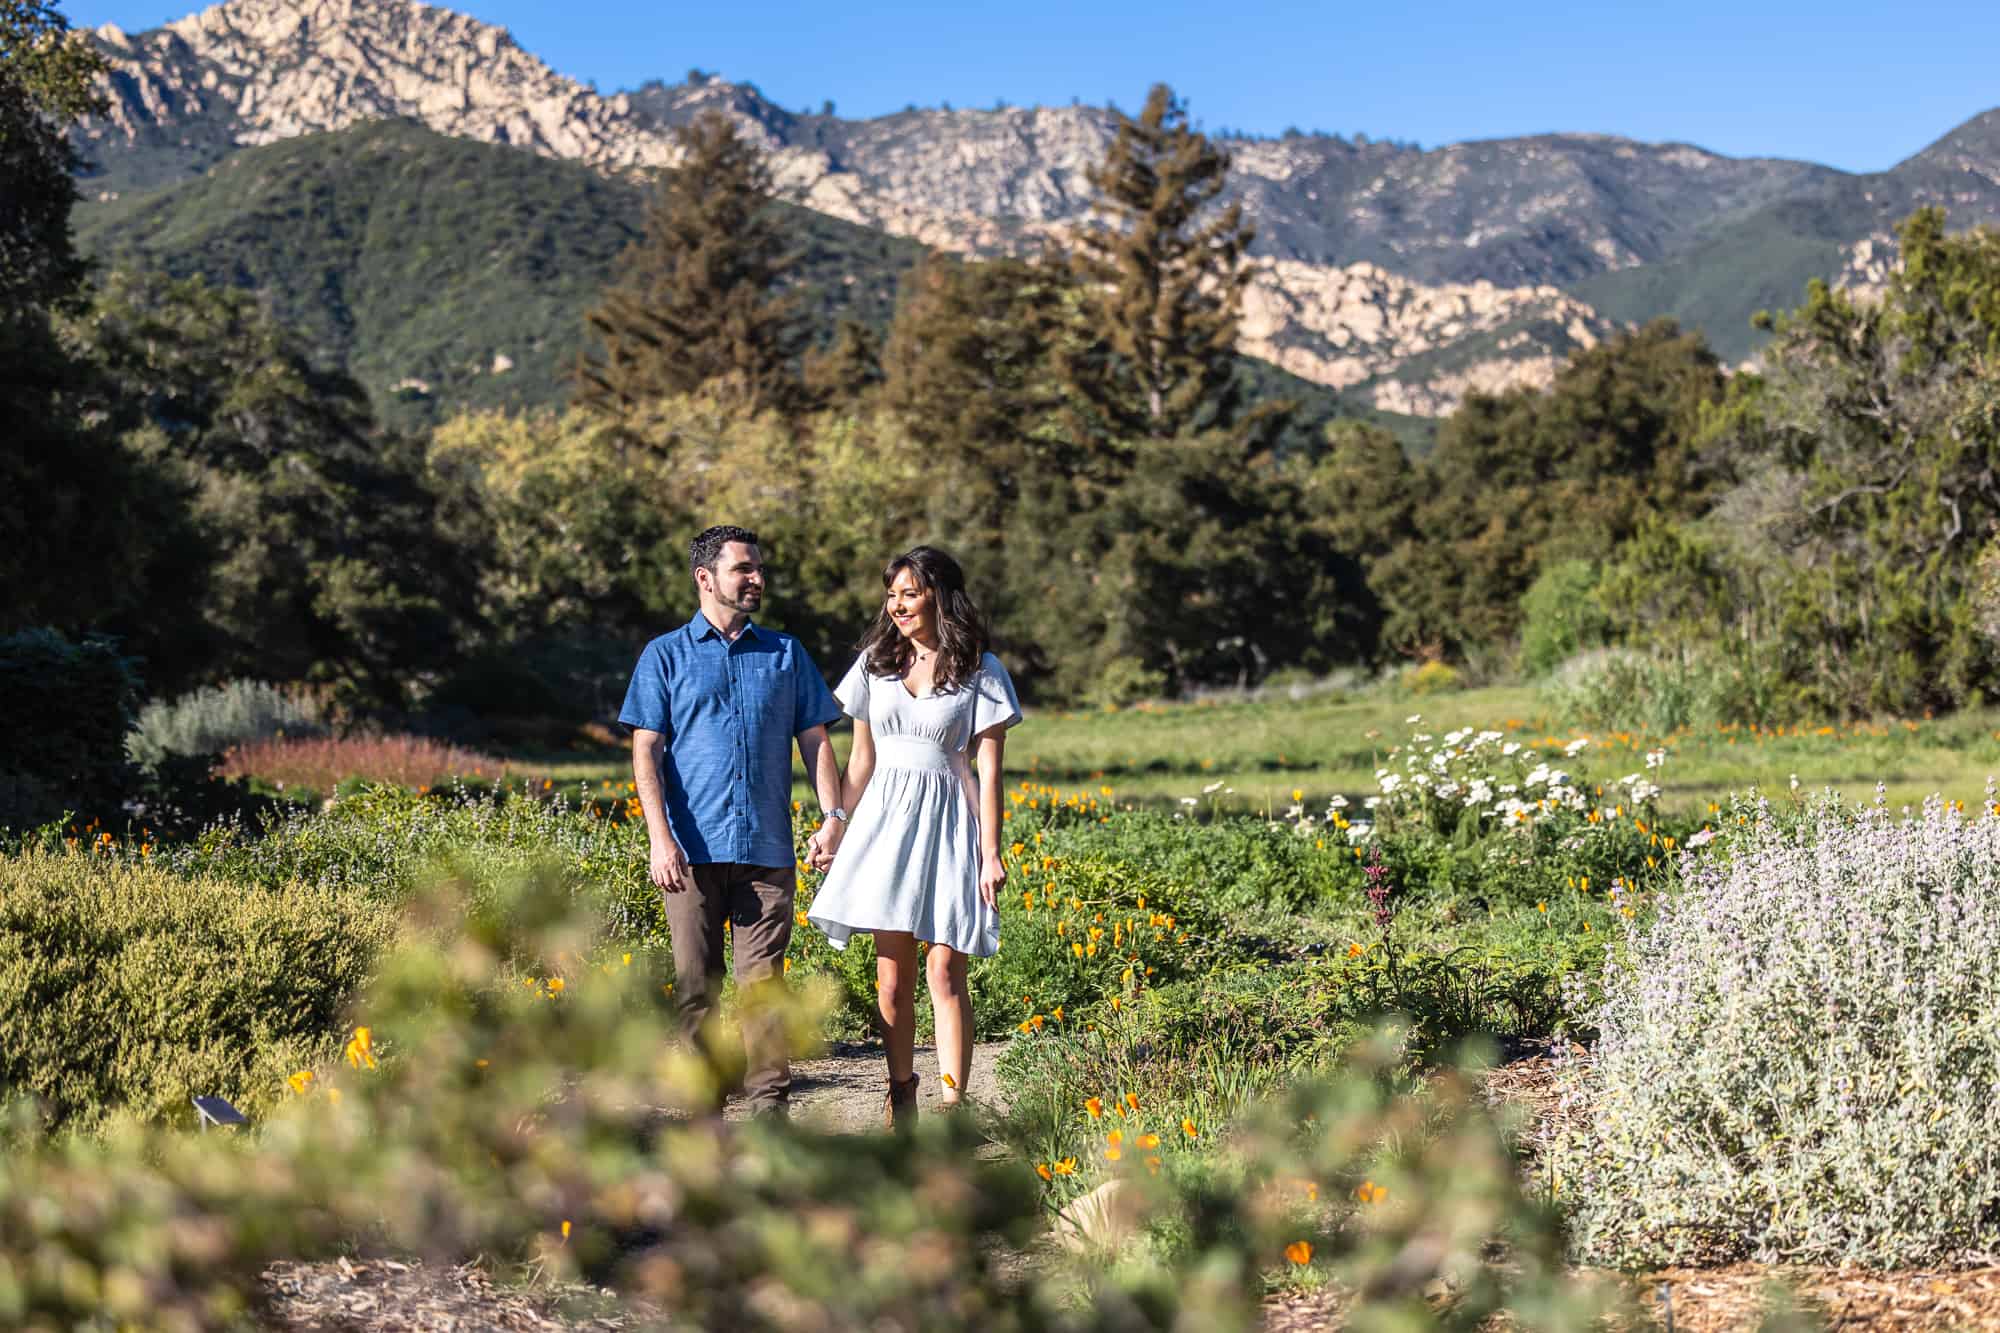 Couple walking at the Santa Barbara Botanic Garden as one of the 15 Exciting Things to Do in Santa Barbara for Couples